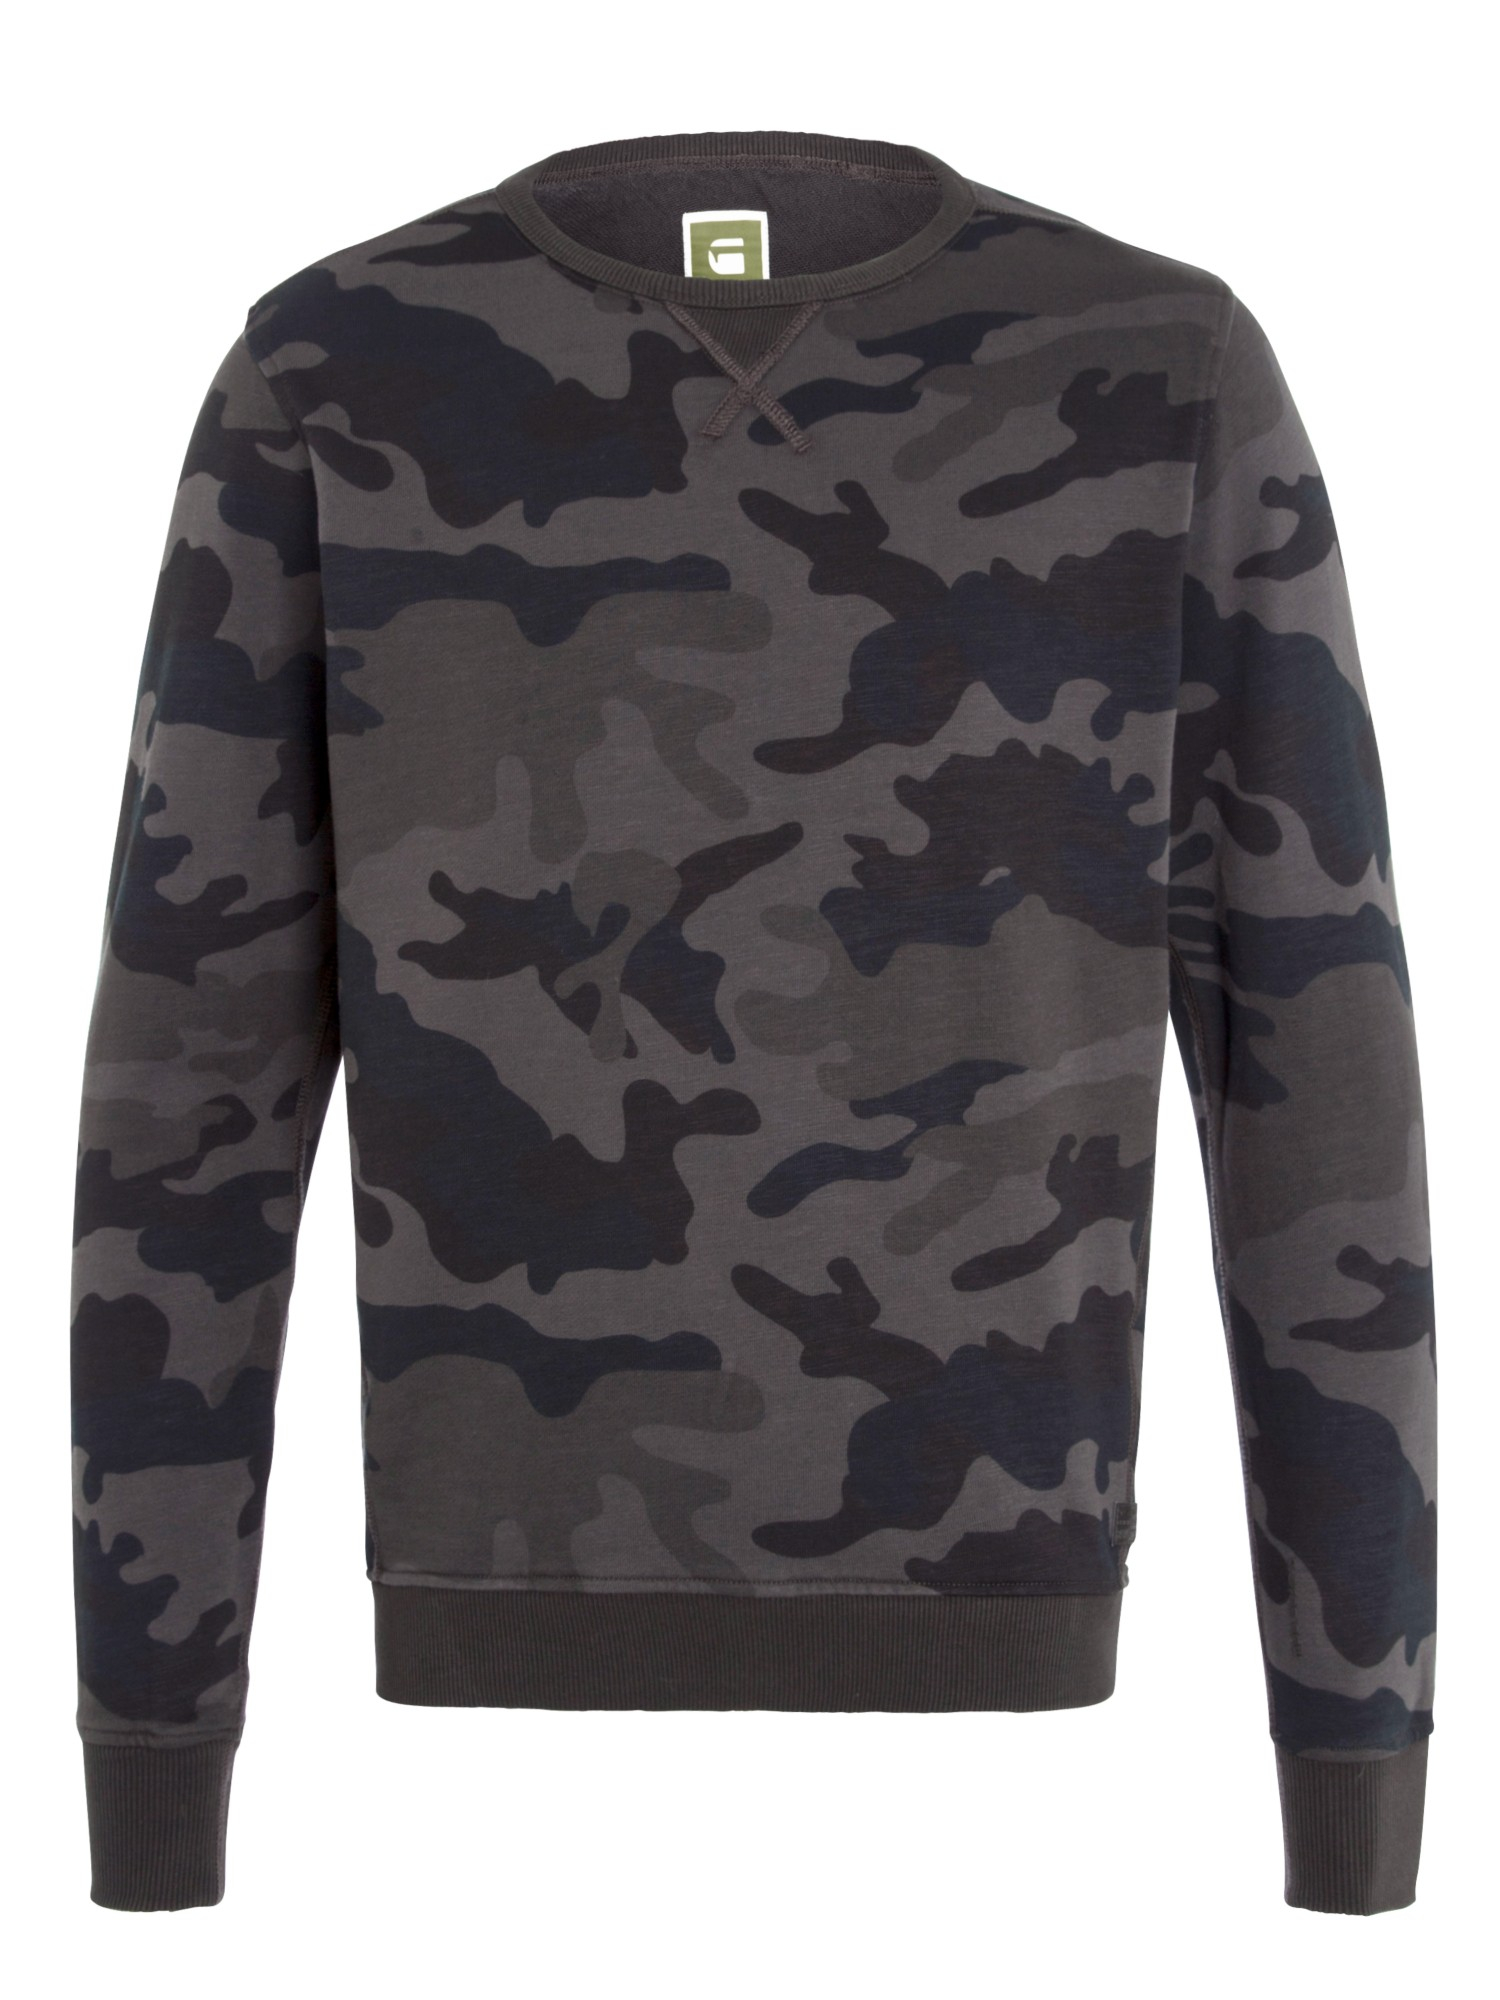 g star raw camo jumper, OFF 73%,Free delivery!